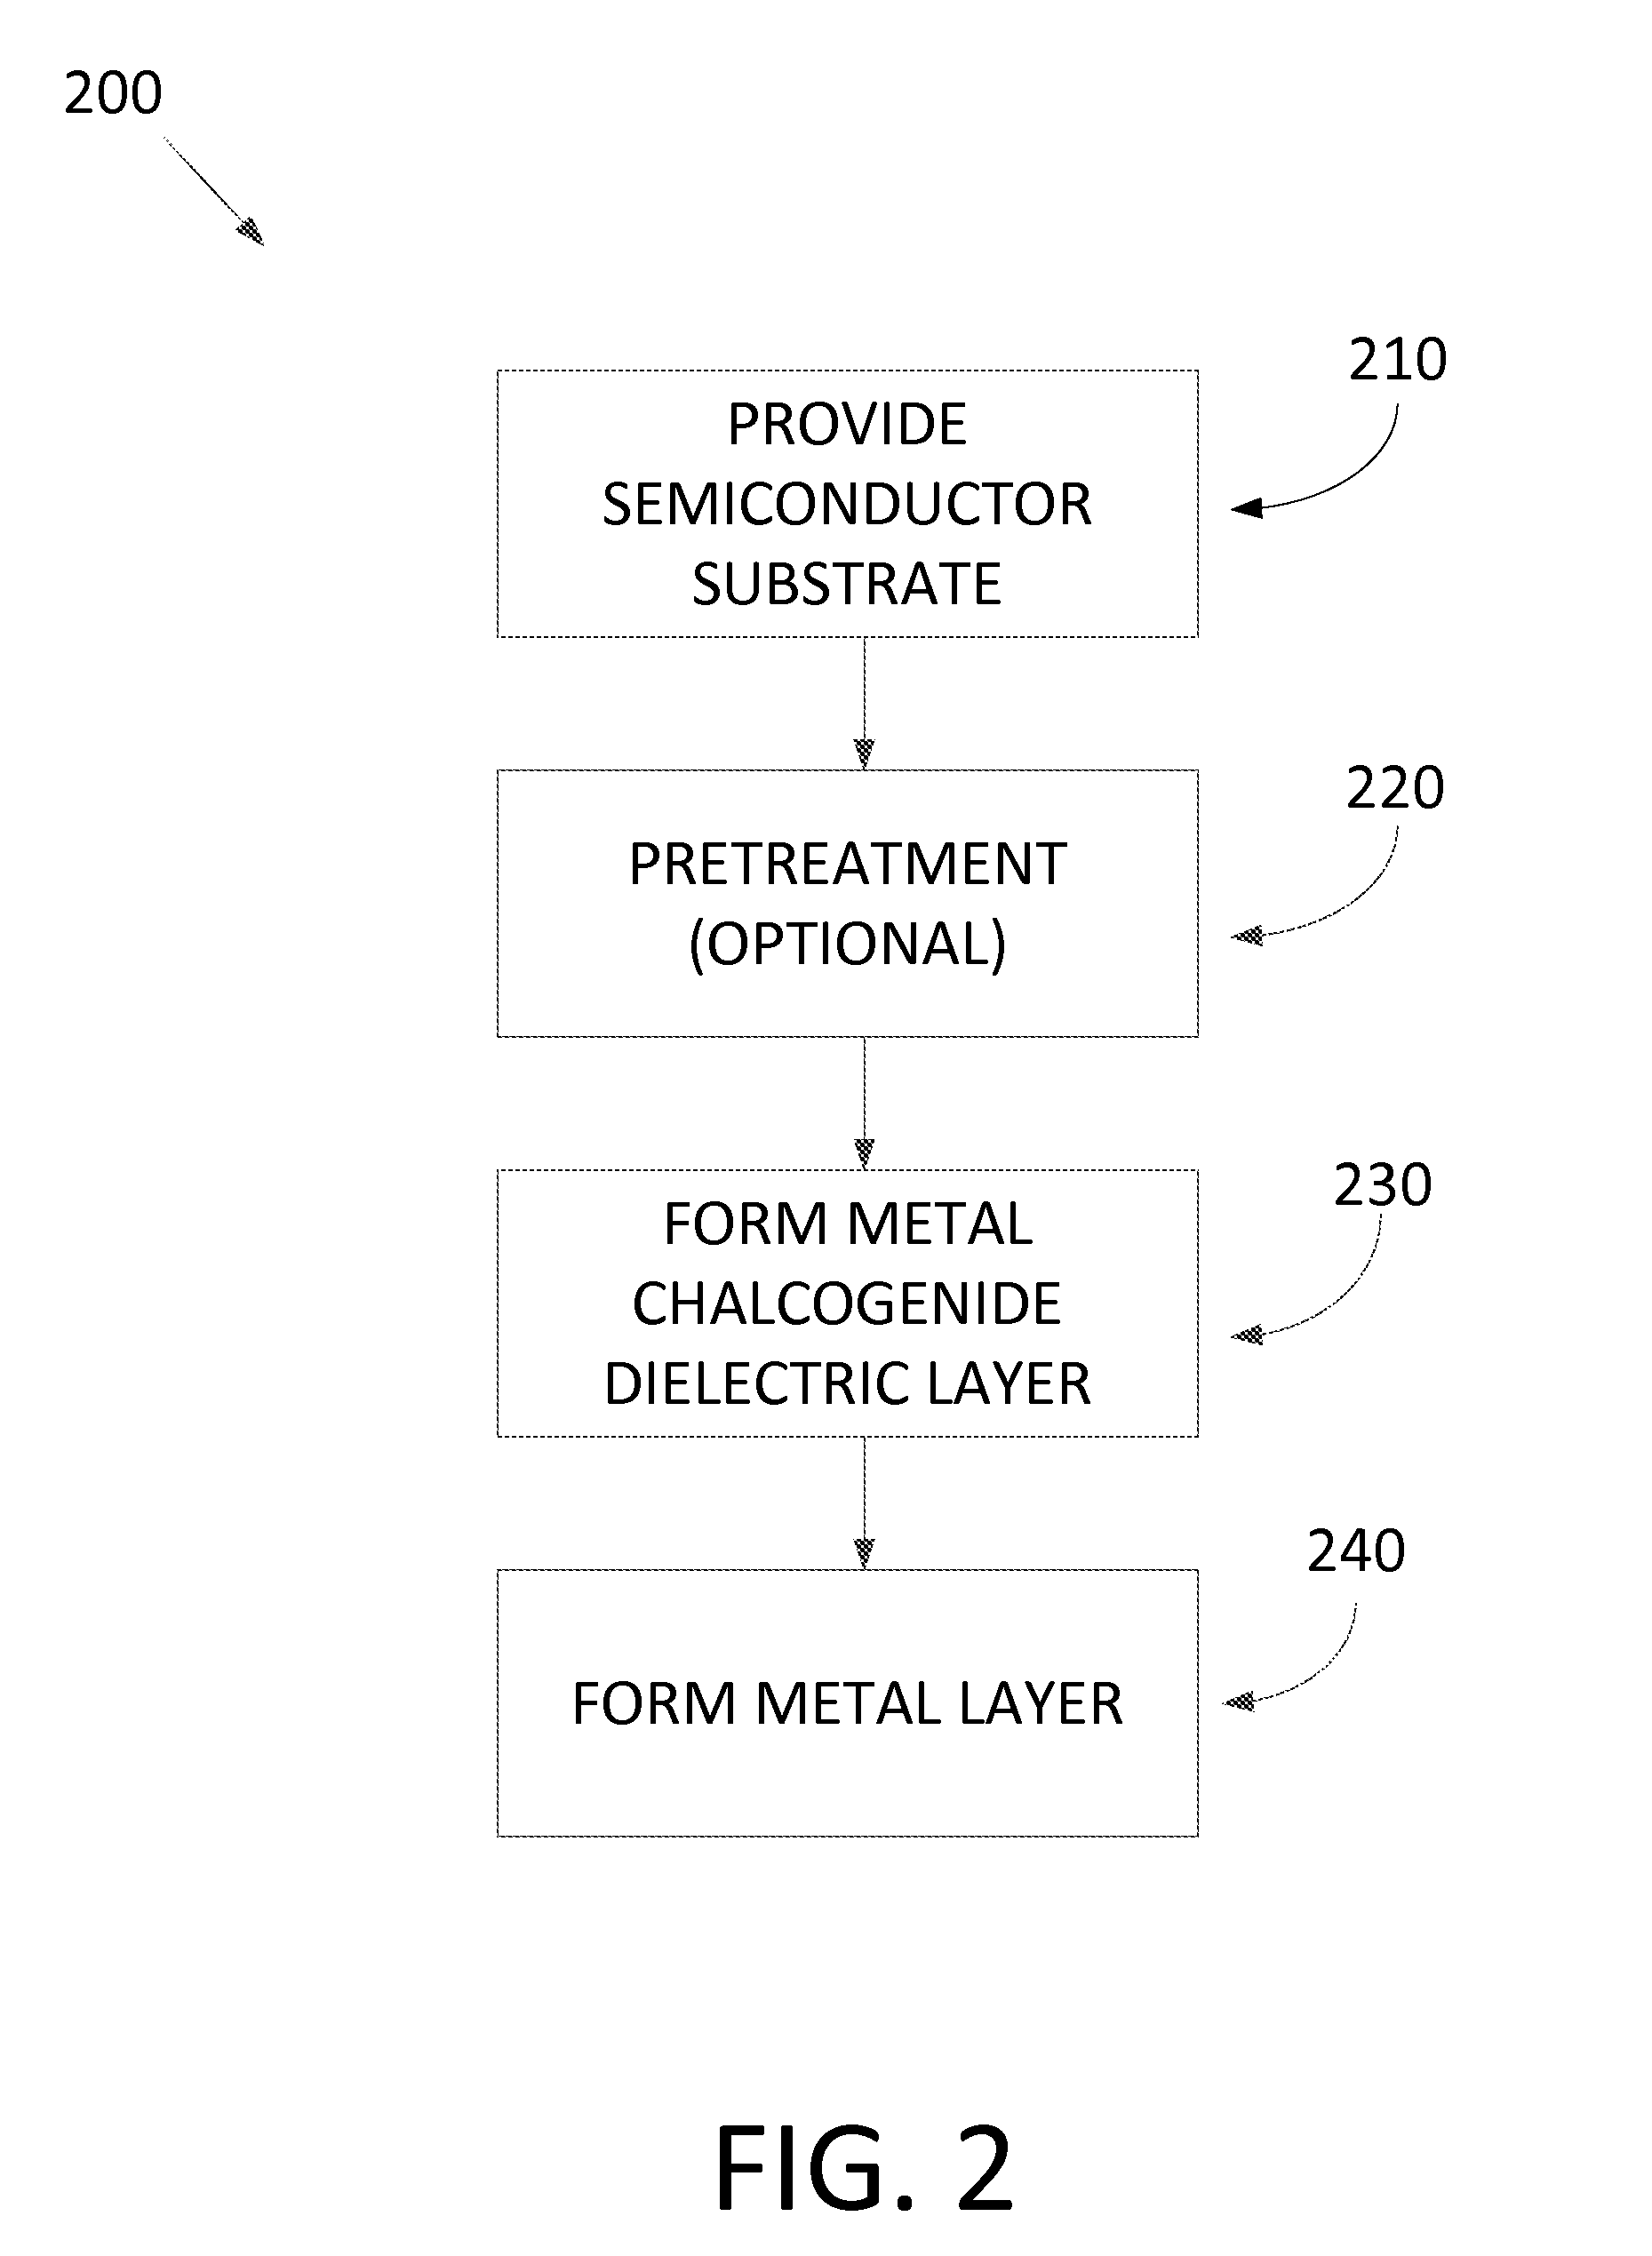 Method for forming metal chalcogenide thin films on a semiconductor device